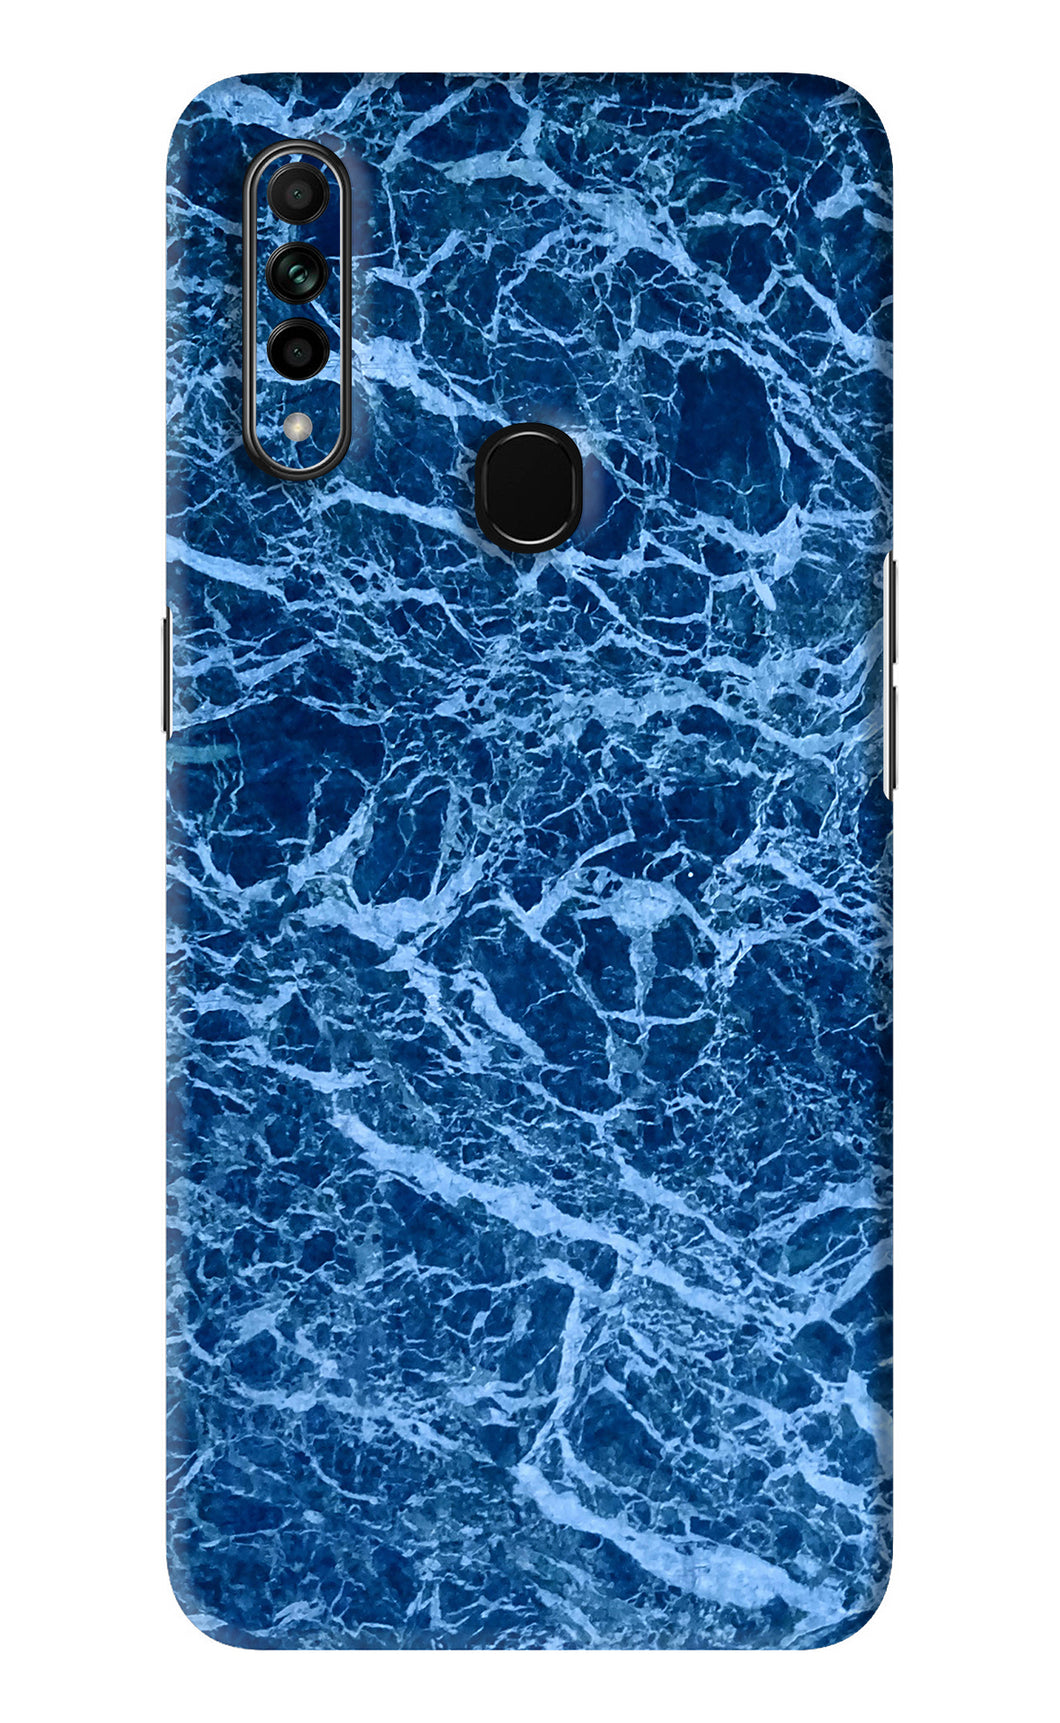 Blue Marble Oppo A31 Back Skin Wrap